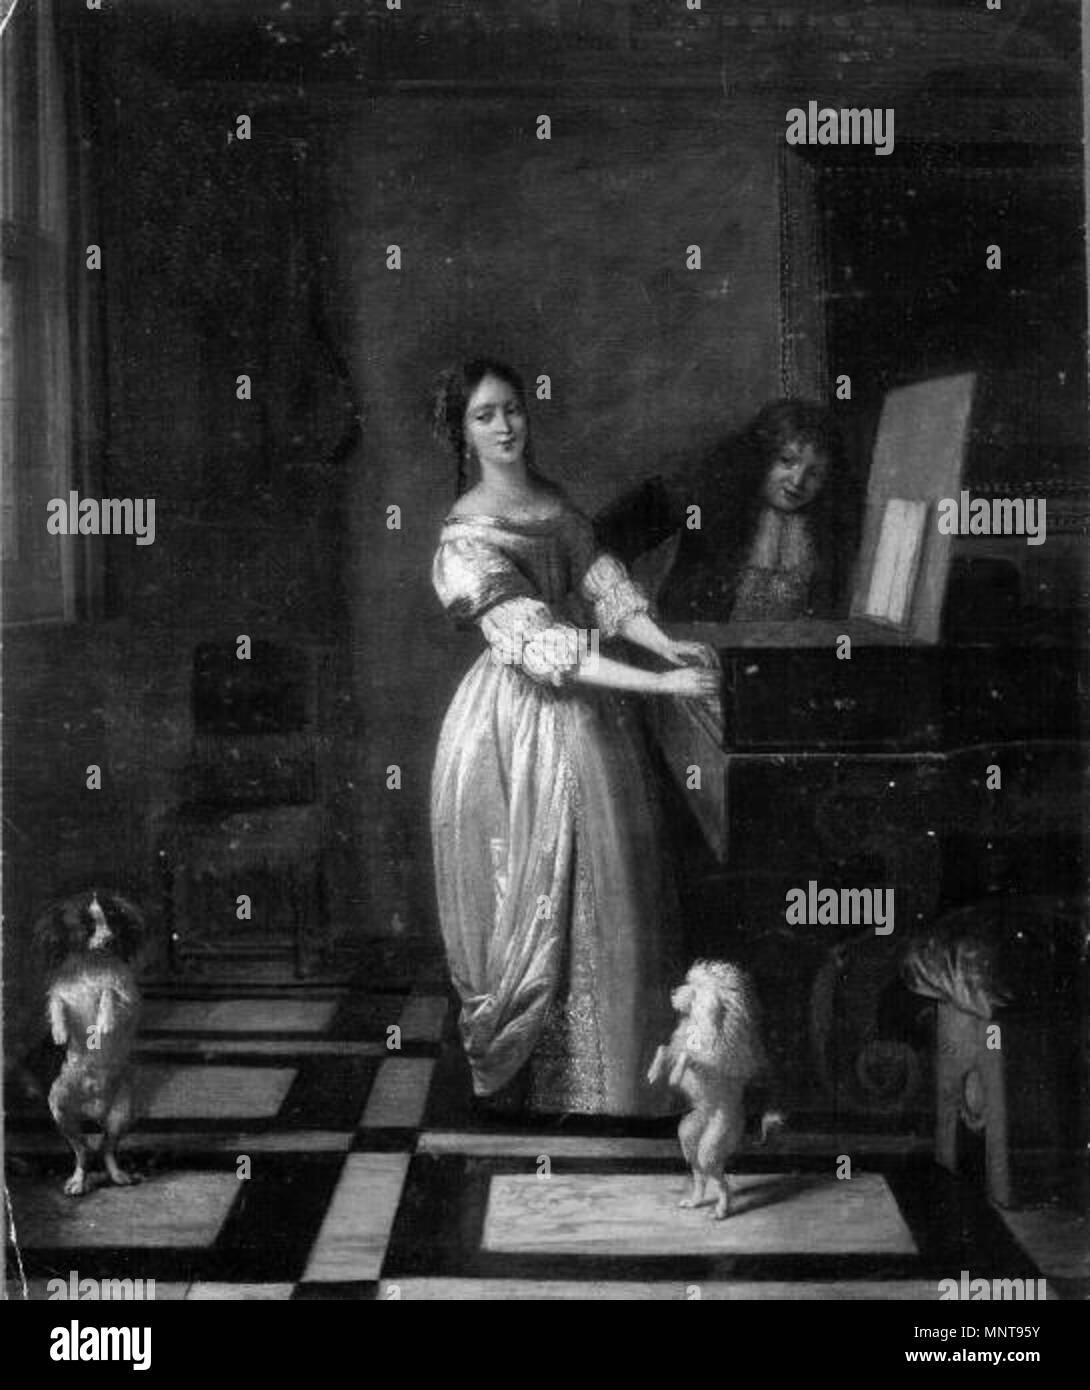 Woman playing the virginal with a man and two dancing dogs    This object is indexed in RKDimages, database of the Netherlands Institute for Art History, under the reference 248328. čeština | English | français | македонски | Nederlands | +/−     ca. 1680–1684.   992 Pieter de Hooch - Woman playing the virginal with a man and two dancing dogs Stock Photo